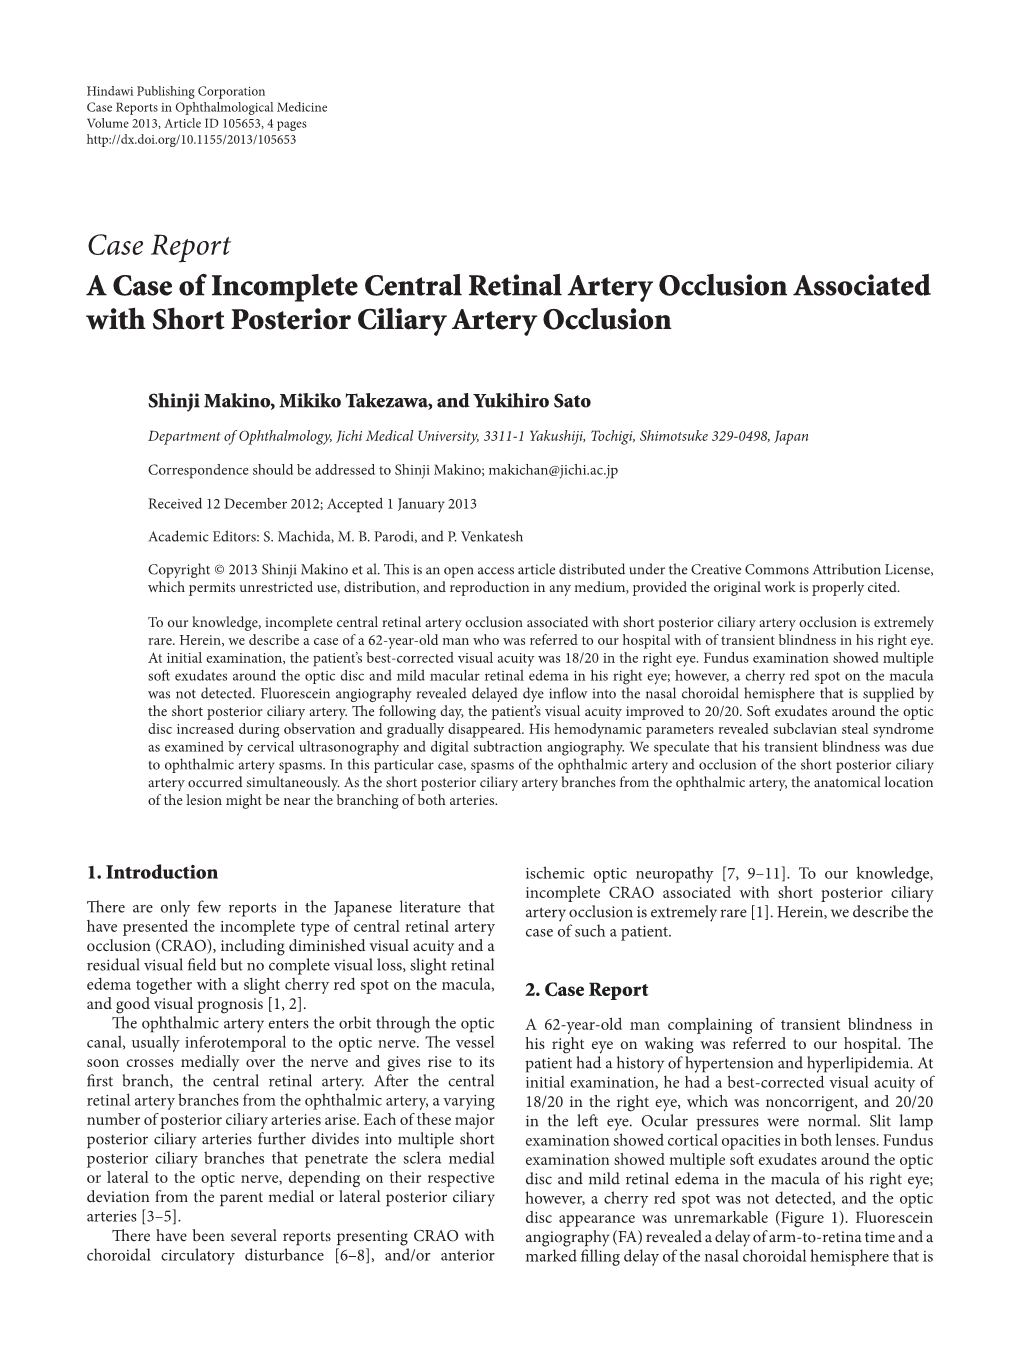 Case Report a Case of Incomplete Central Retinal Artery Occlusion Associated with Short Posterior Ciliary Artery Occlusion